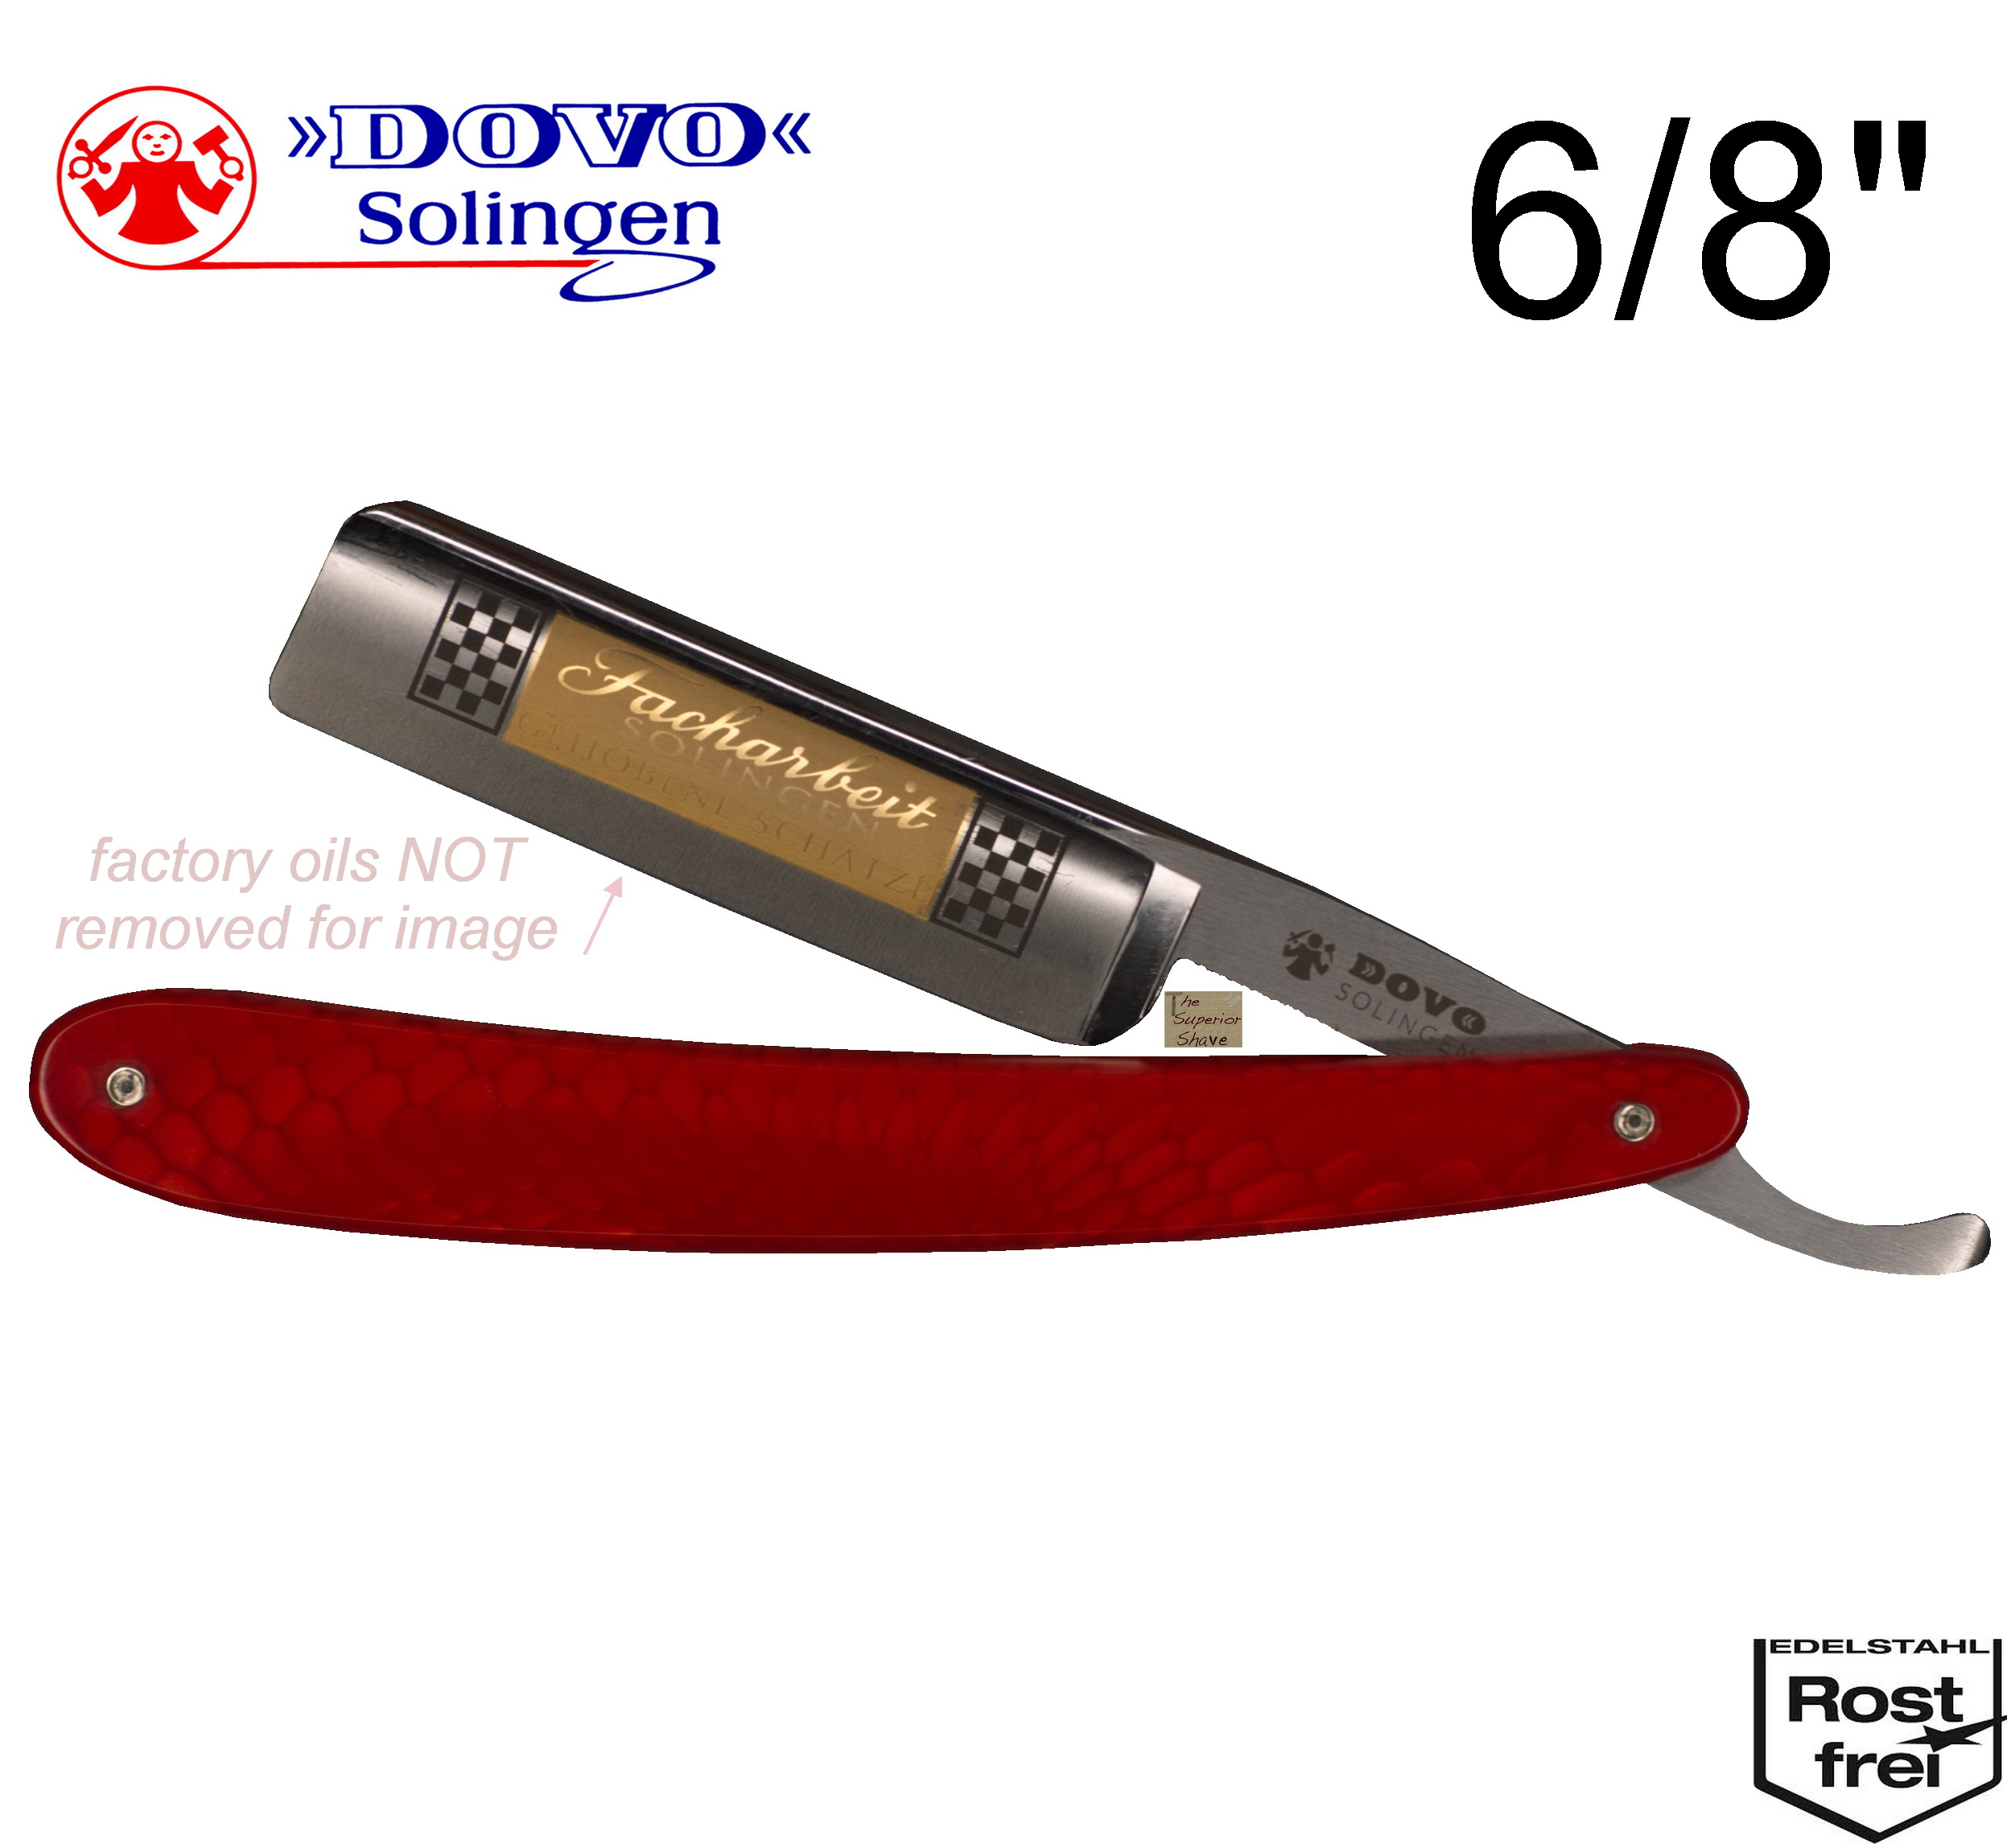 Dovo Facharbeit German Straight Germany Look 136813315 | 1967-1971 in Size | Stainless | 6/8 Razor Full Hollow Square Acrylic Point Red Steel HISTORIC | | Ground Reptile Handle, | Made 